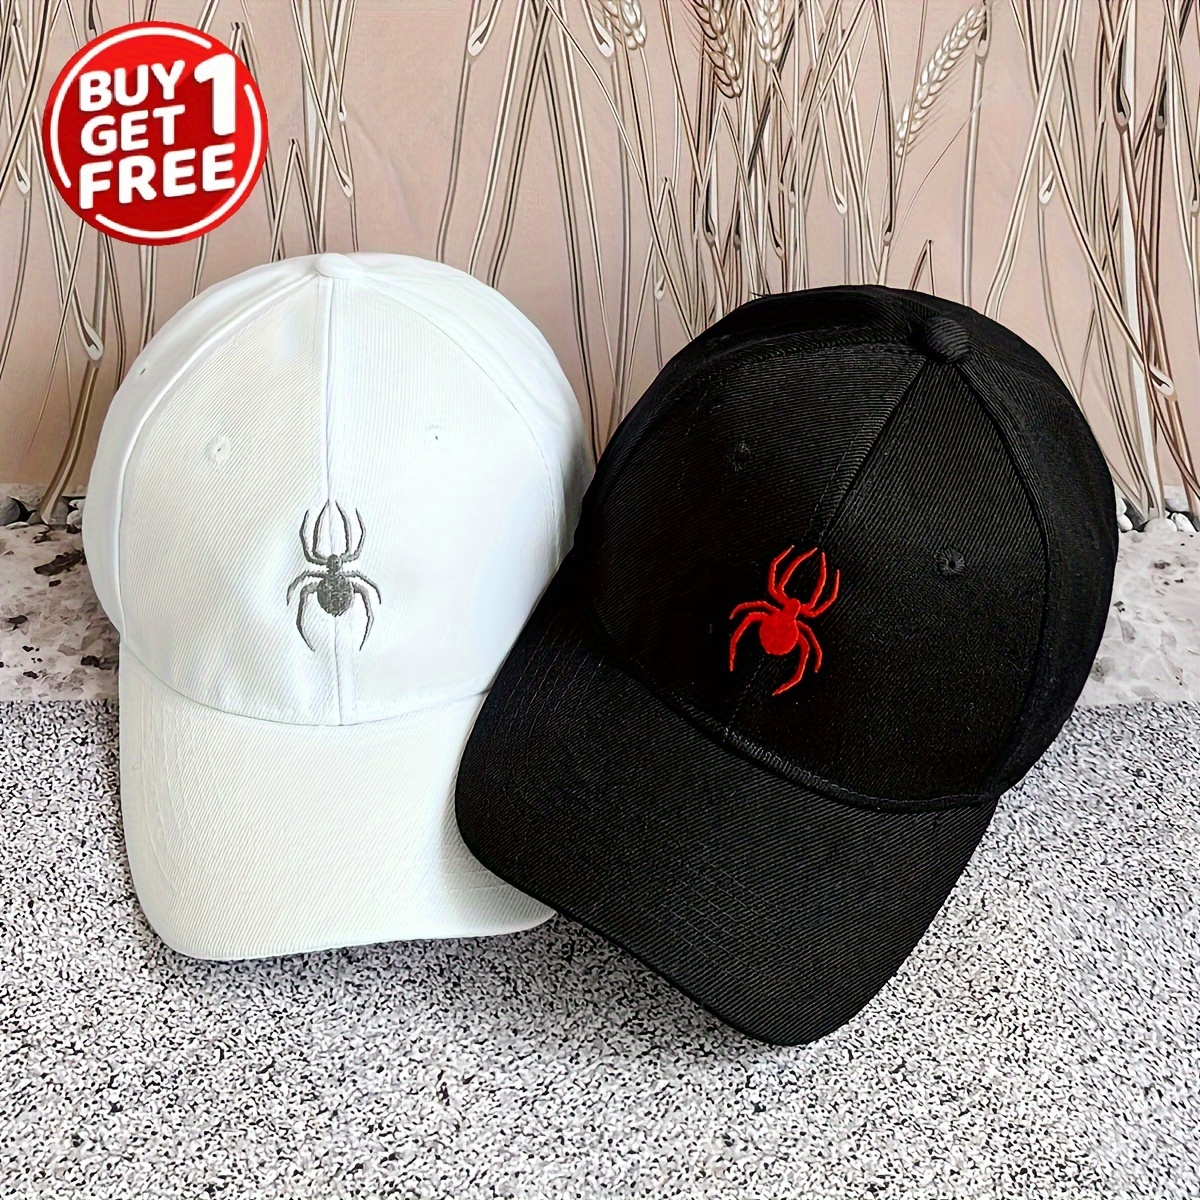 

2pcs Spider Couple Baseball Cap Set Embroidery Black & White Casual Dad Hats Lightweight Adjustable Casual Golf Sun Hats For Women & Men